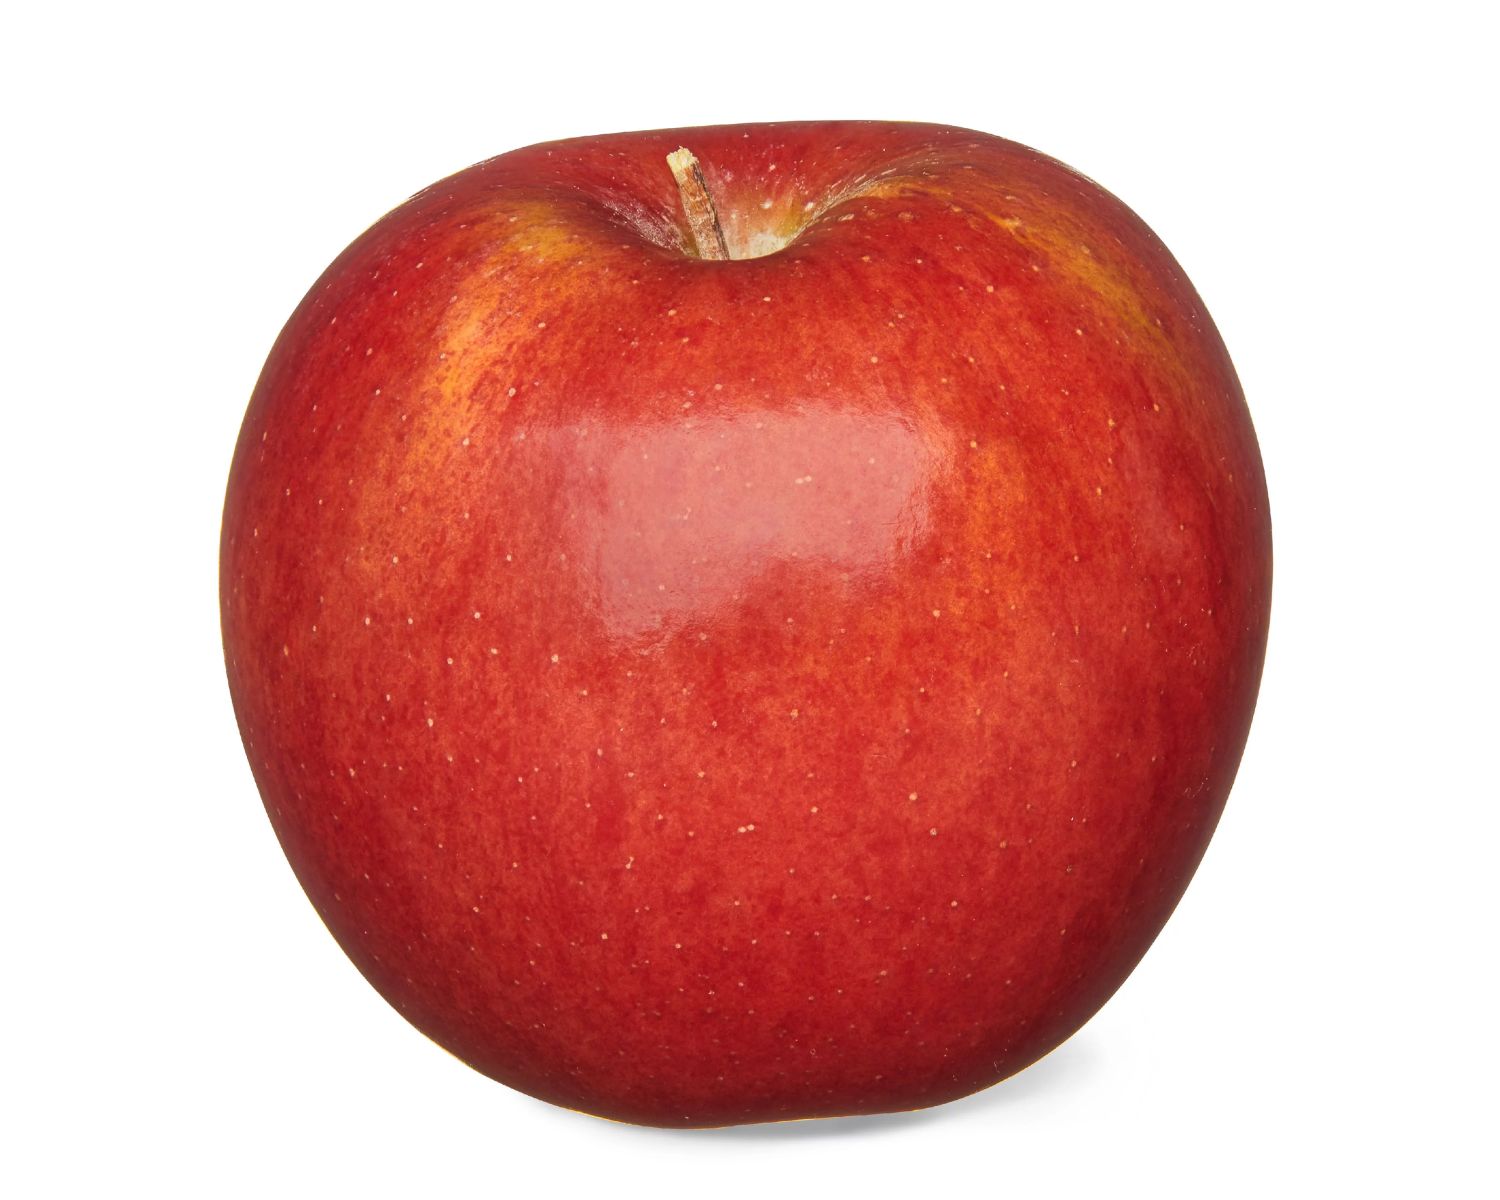 Envy™ Apples Information and Facts